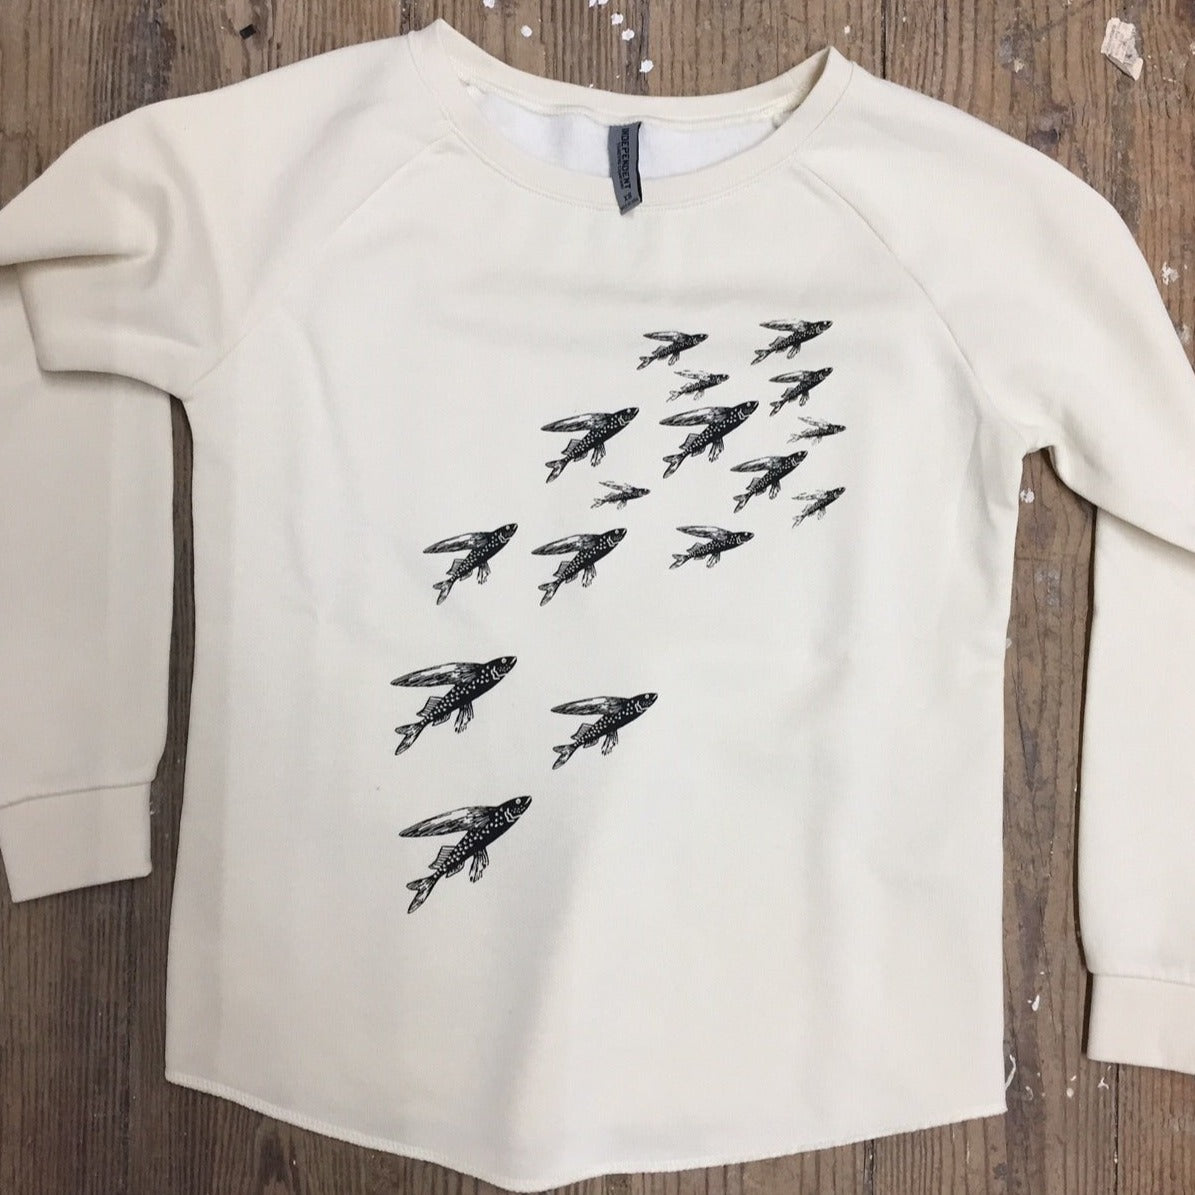 Cream colored sweatshirt featuring the 'School of Fish' design on the front chest in black ink.